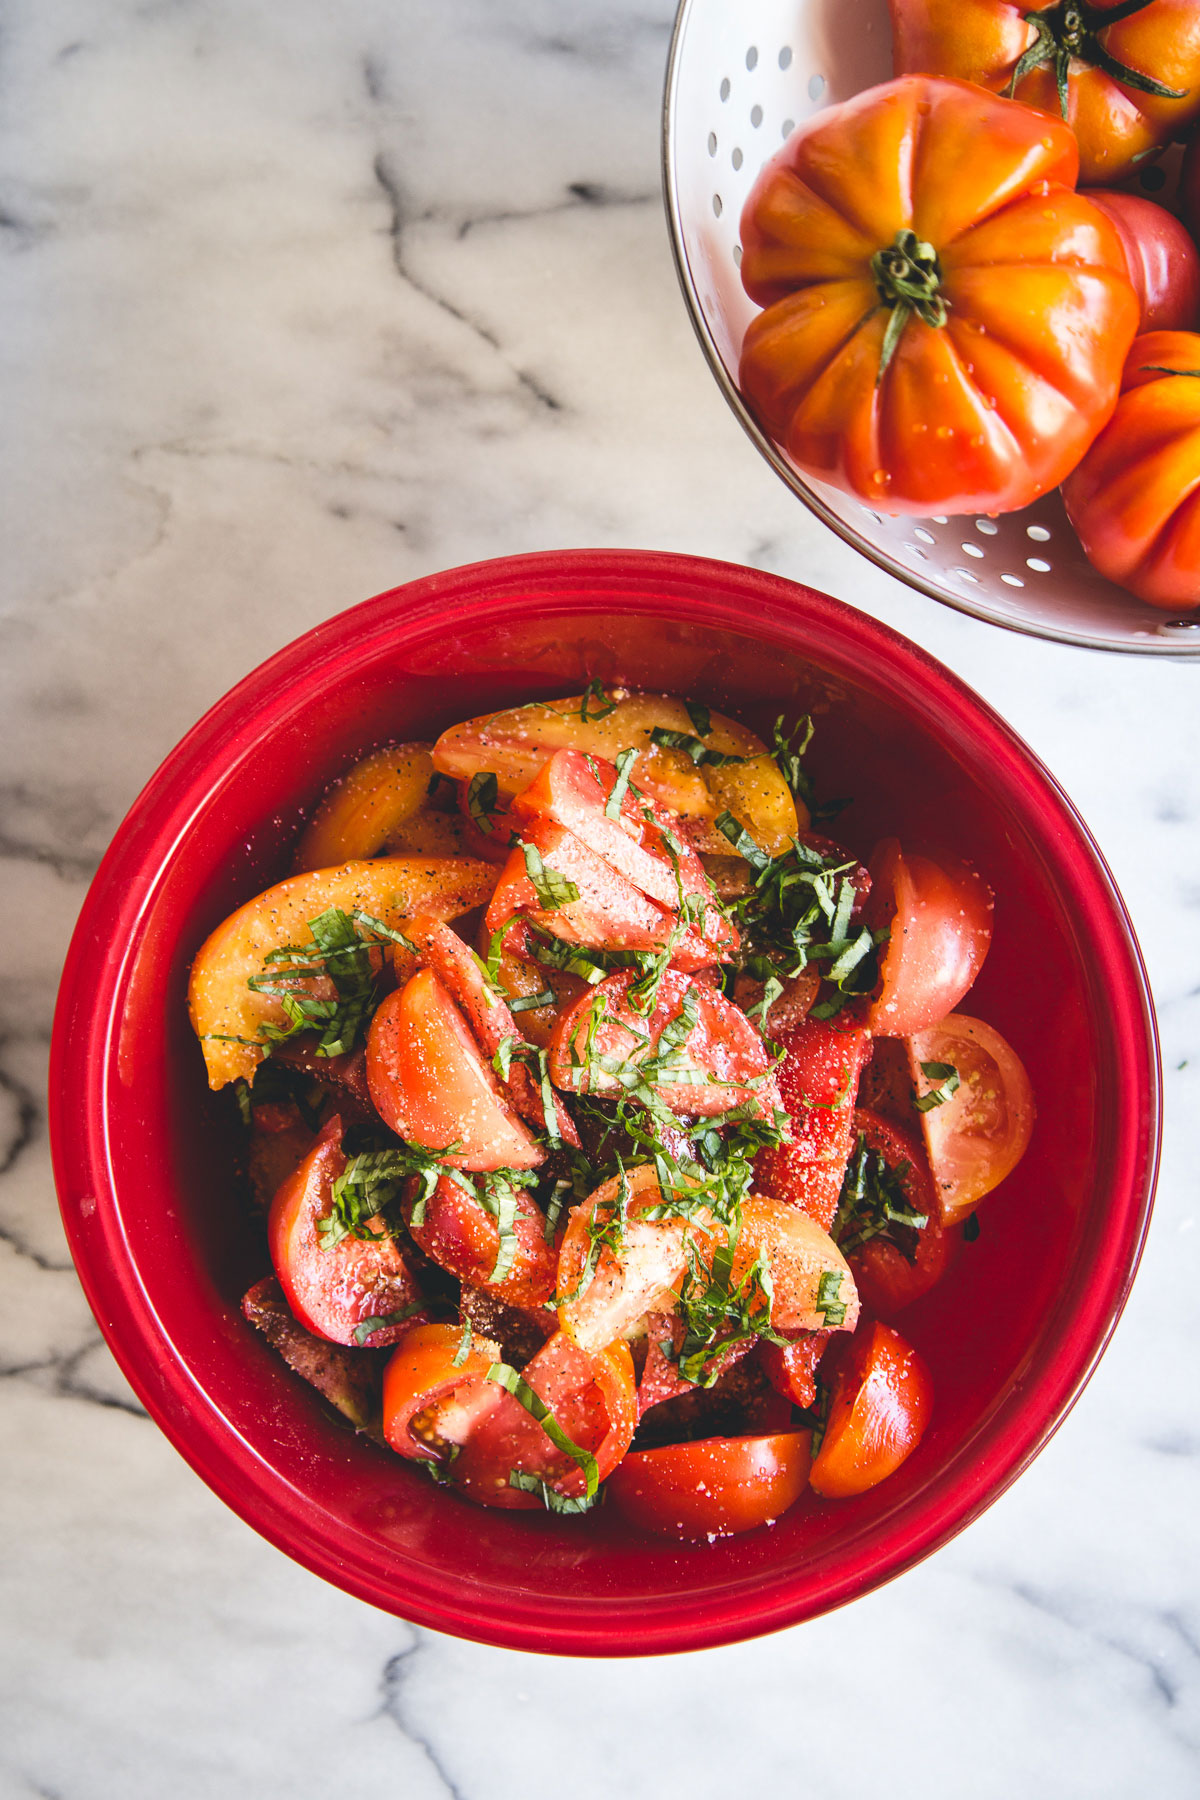 To highlight the heirloom tomato and let it speak for itself, we want to share this stunning heirloom tomato & mozzarella salad recipe with you! This bright summer salad is perfect for outdoor barbecues, a date night in or with a nice side of grilled beef.